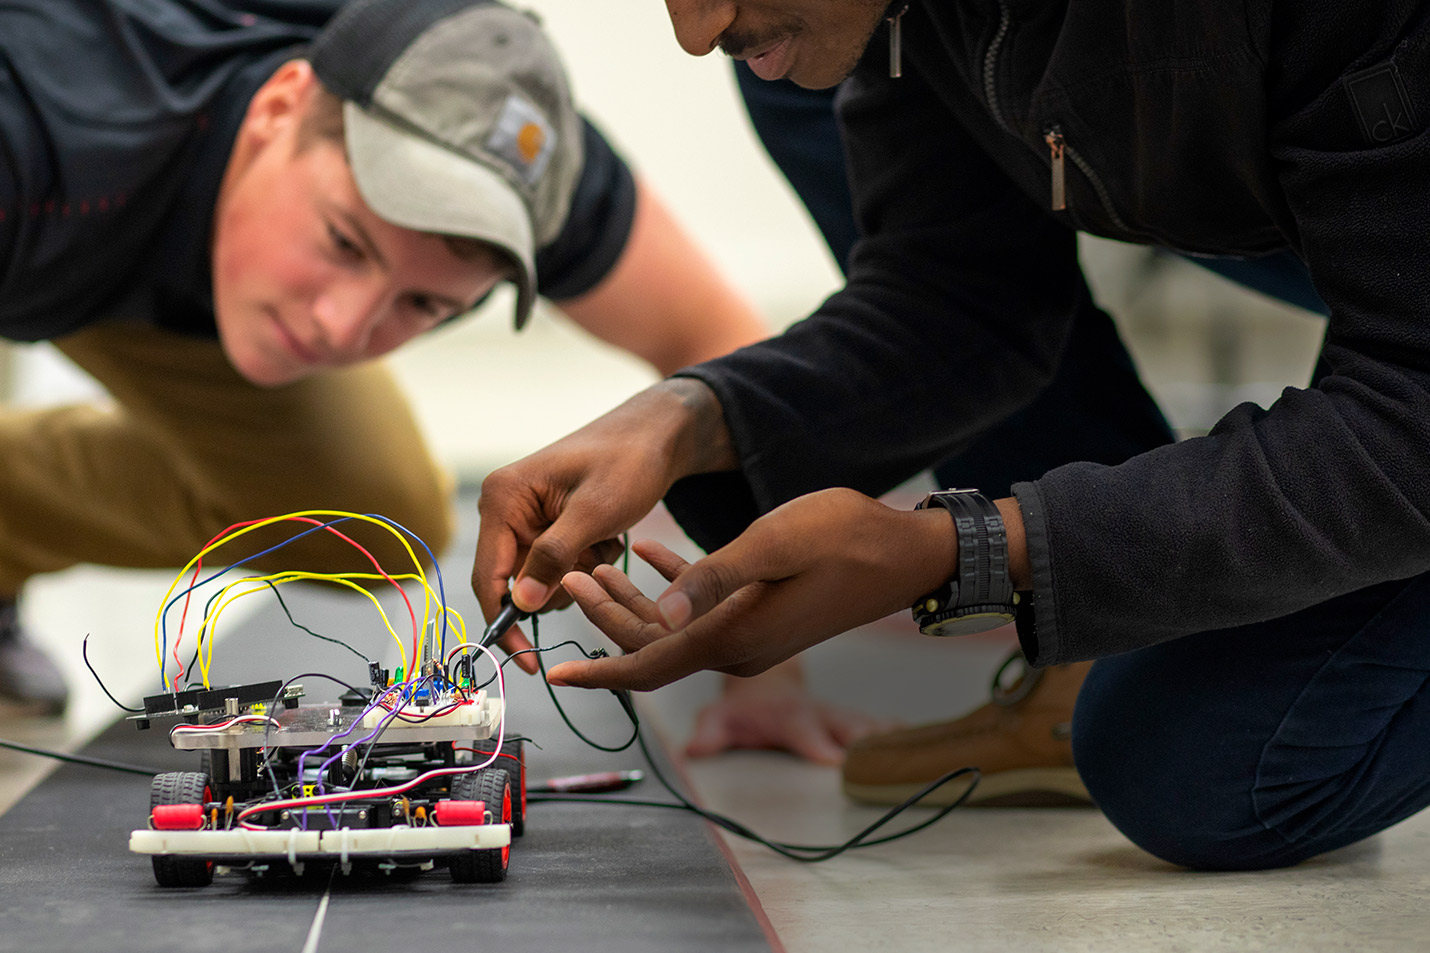 Two students kneeling in the floor and working together on a small robotics project that has colorful wires and wheels.